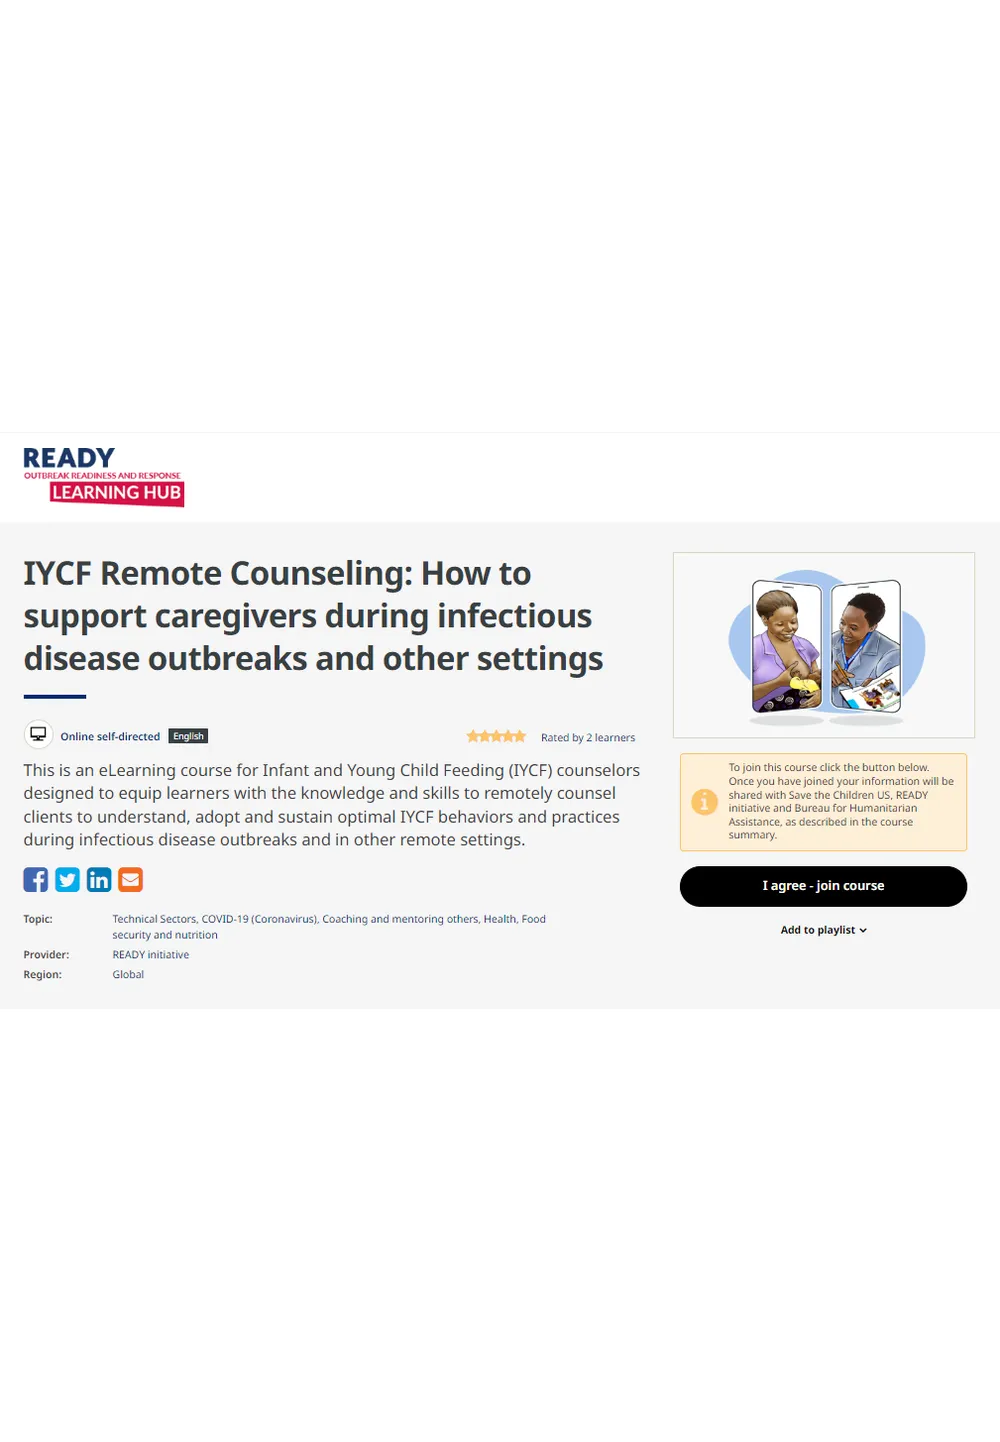 IYCF Remote Counseling How to support caregivers during infectious disease outbreaks and other settings thumbnail